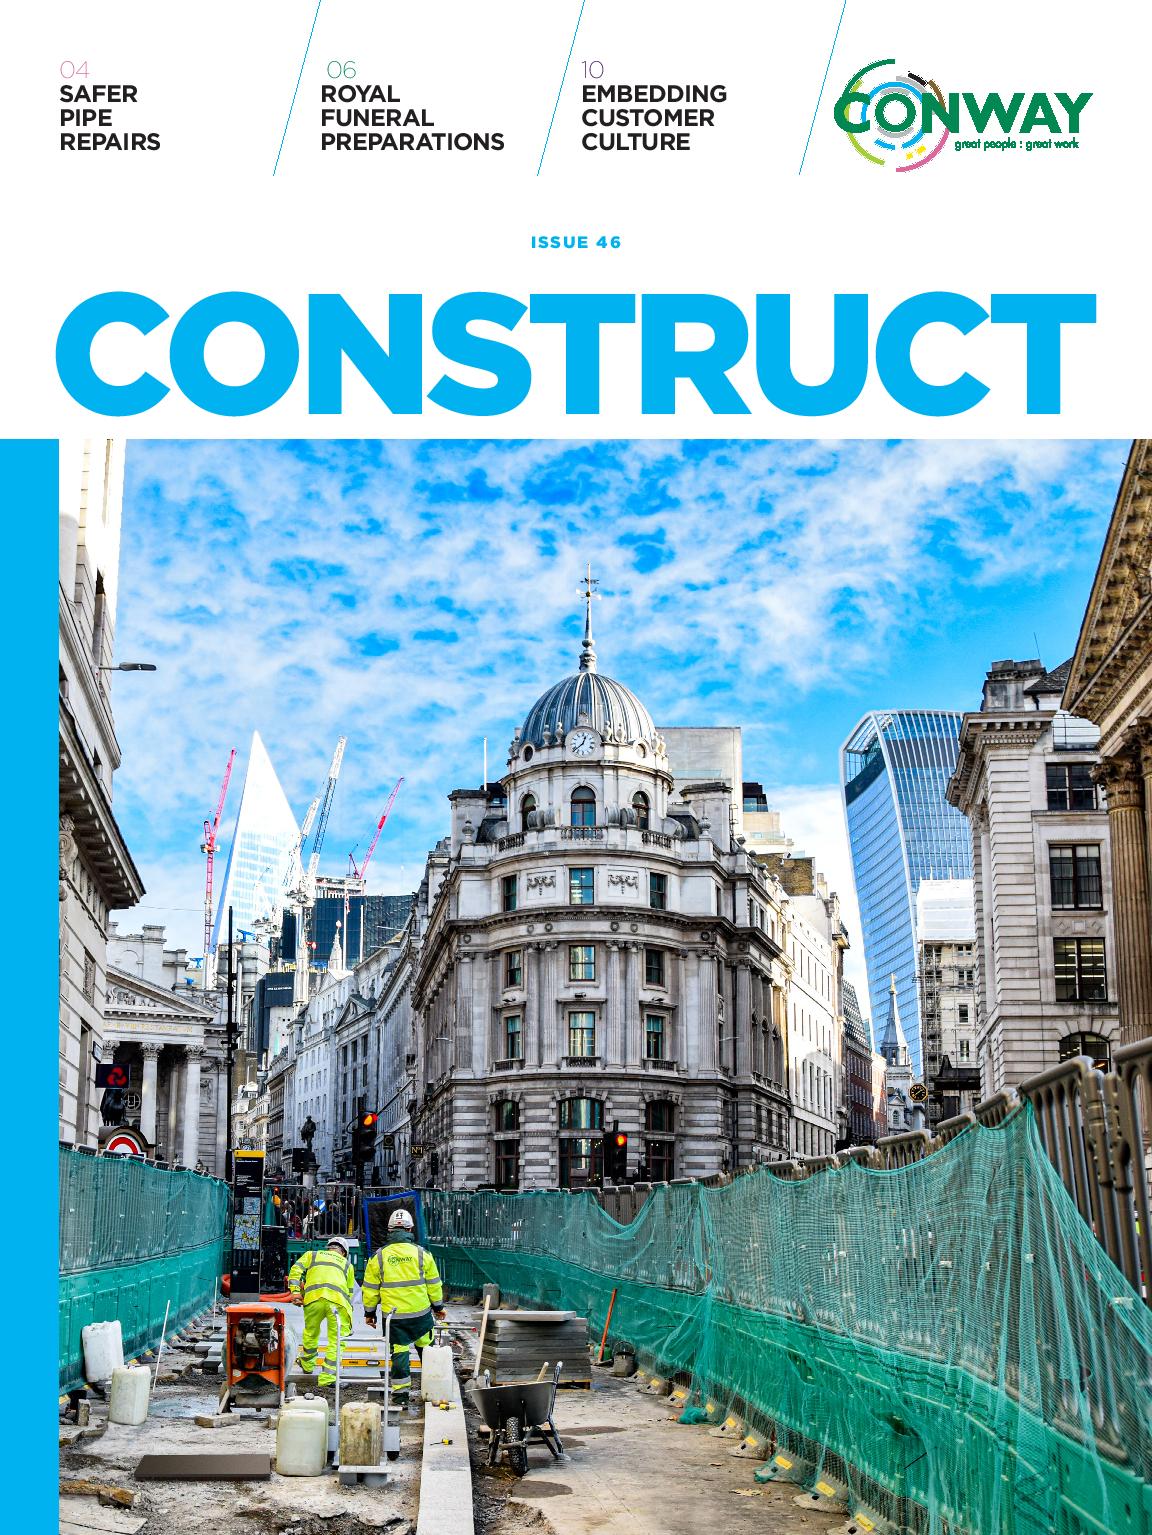 /files/library/images/Construct/00_Cover_Construct_Issue46-page-001.jpg